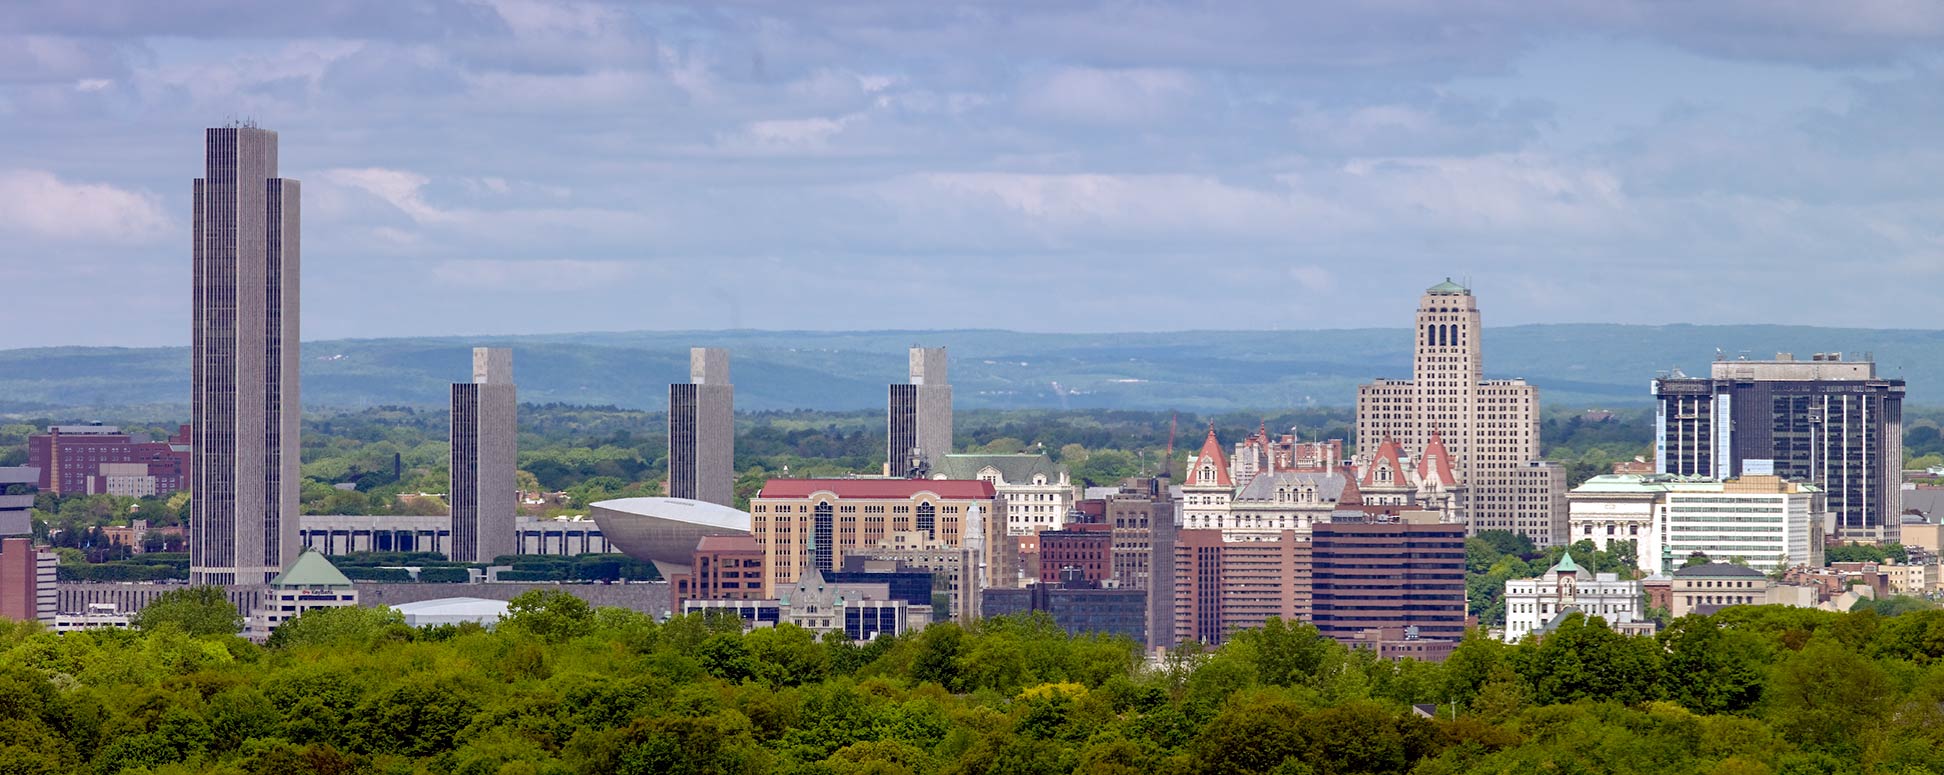 Panorama of Albany the capital of New York state on the Hudson River